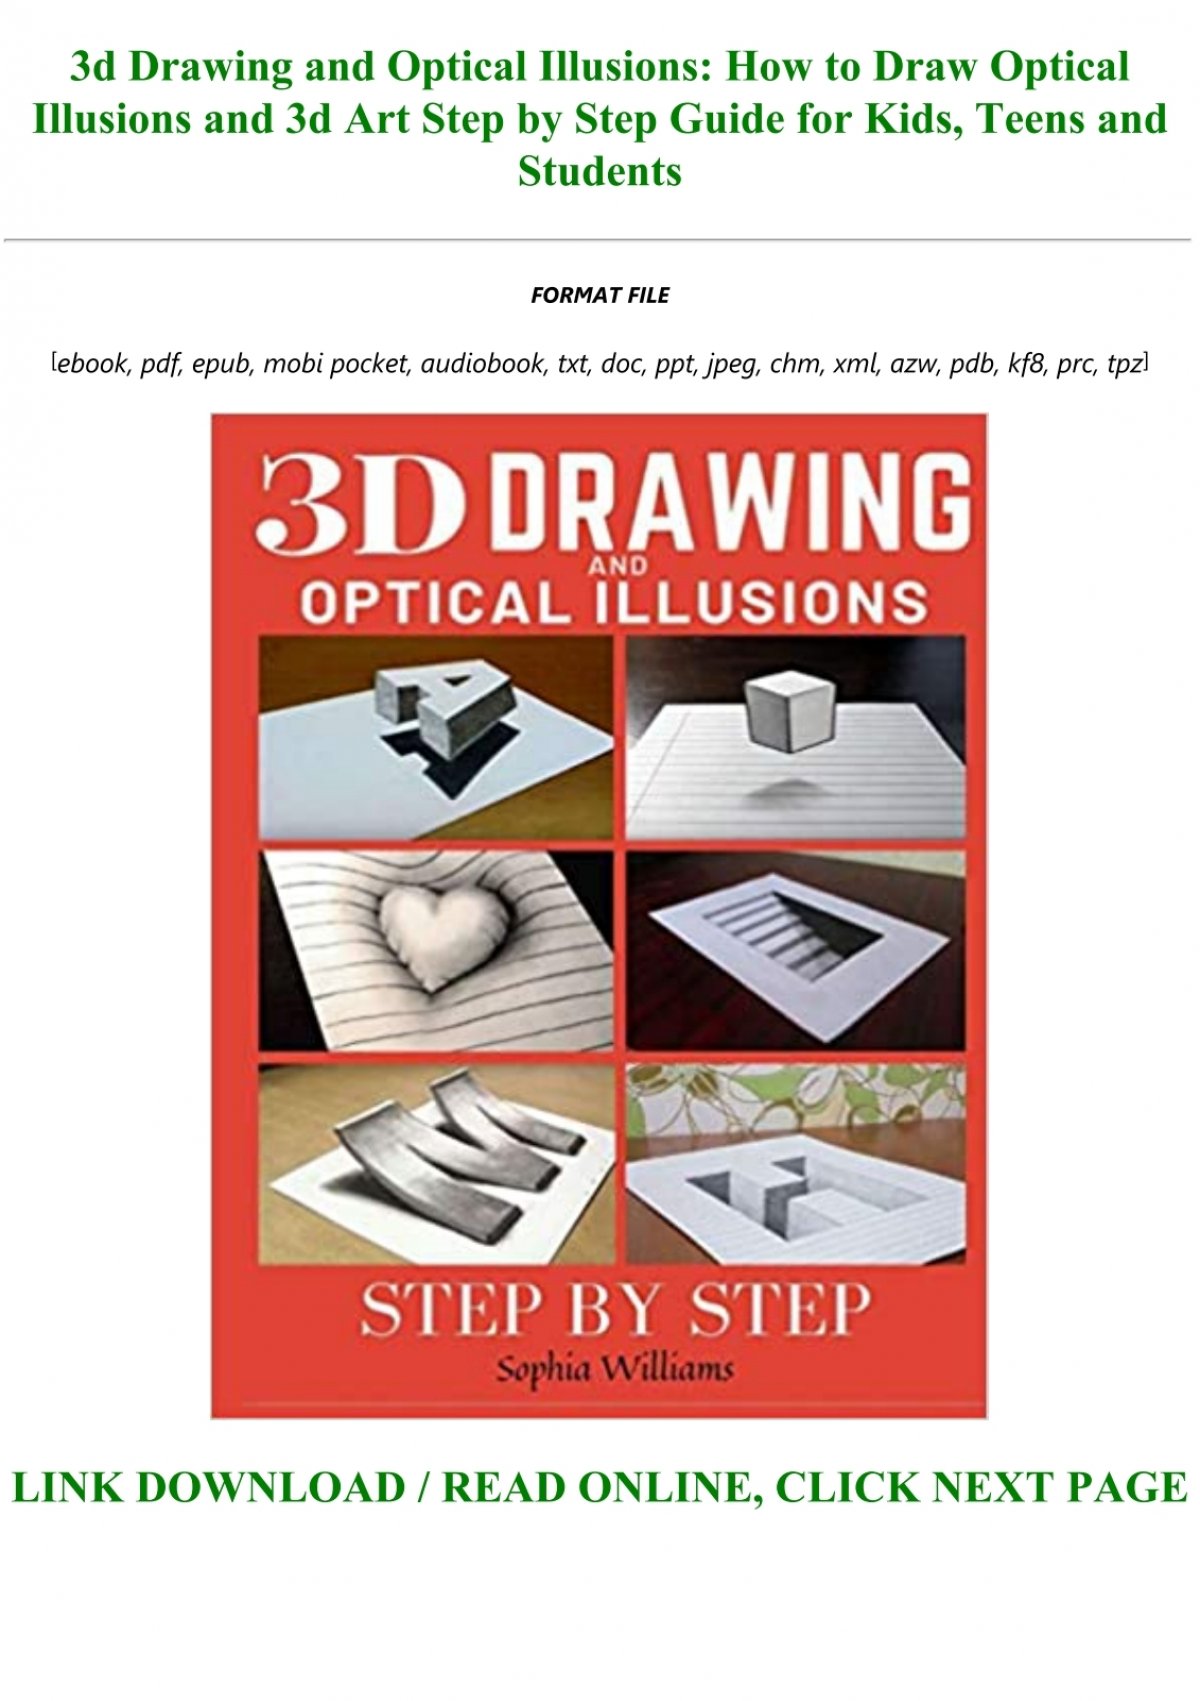 3d_Drawing_and_Optical_Illusions_How_to_Draw_Optical_Illusions_and_3d ...